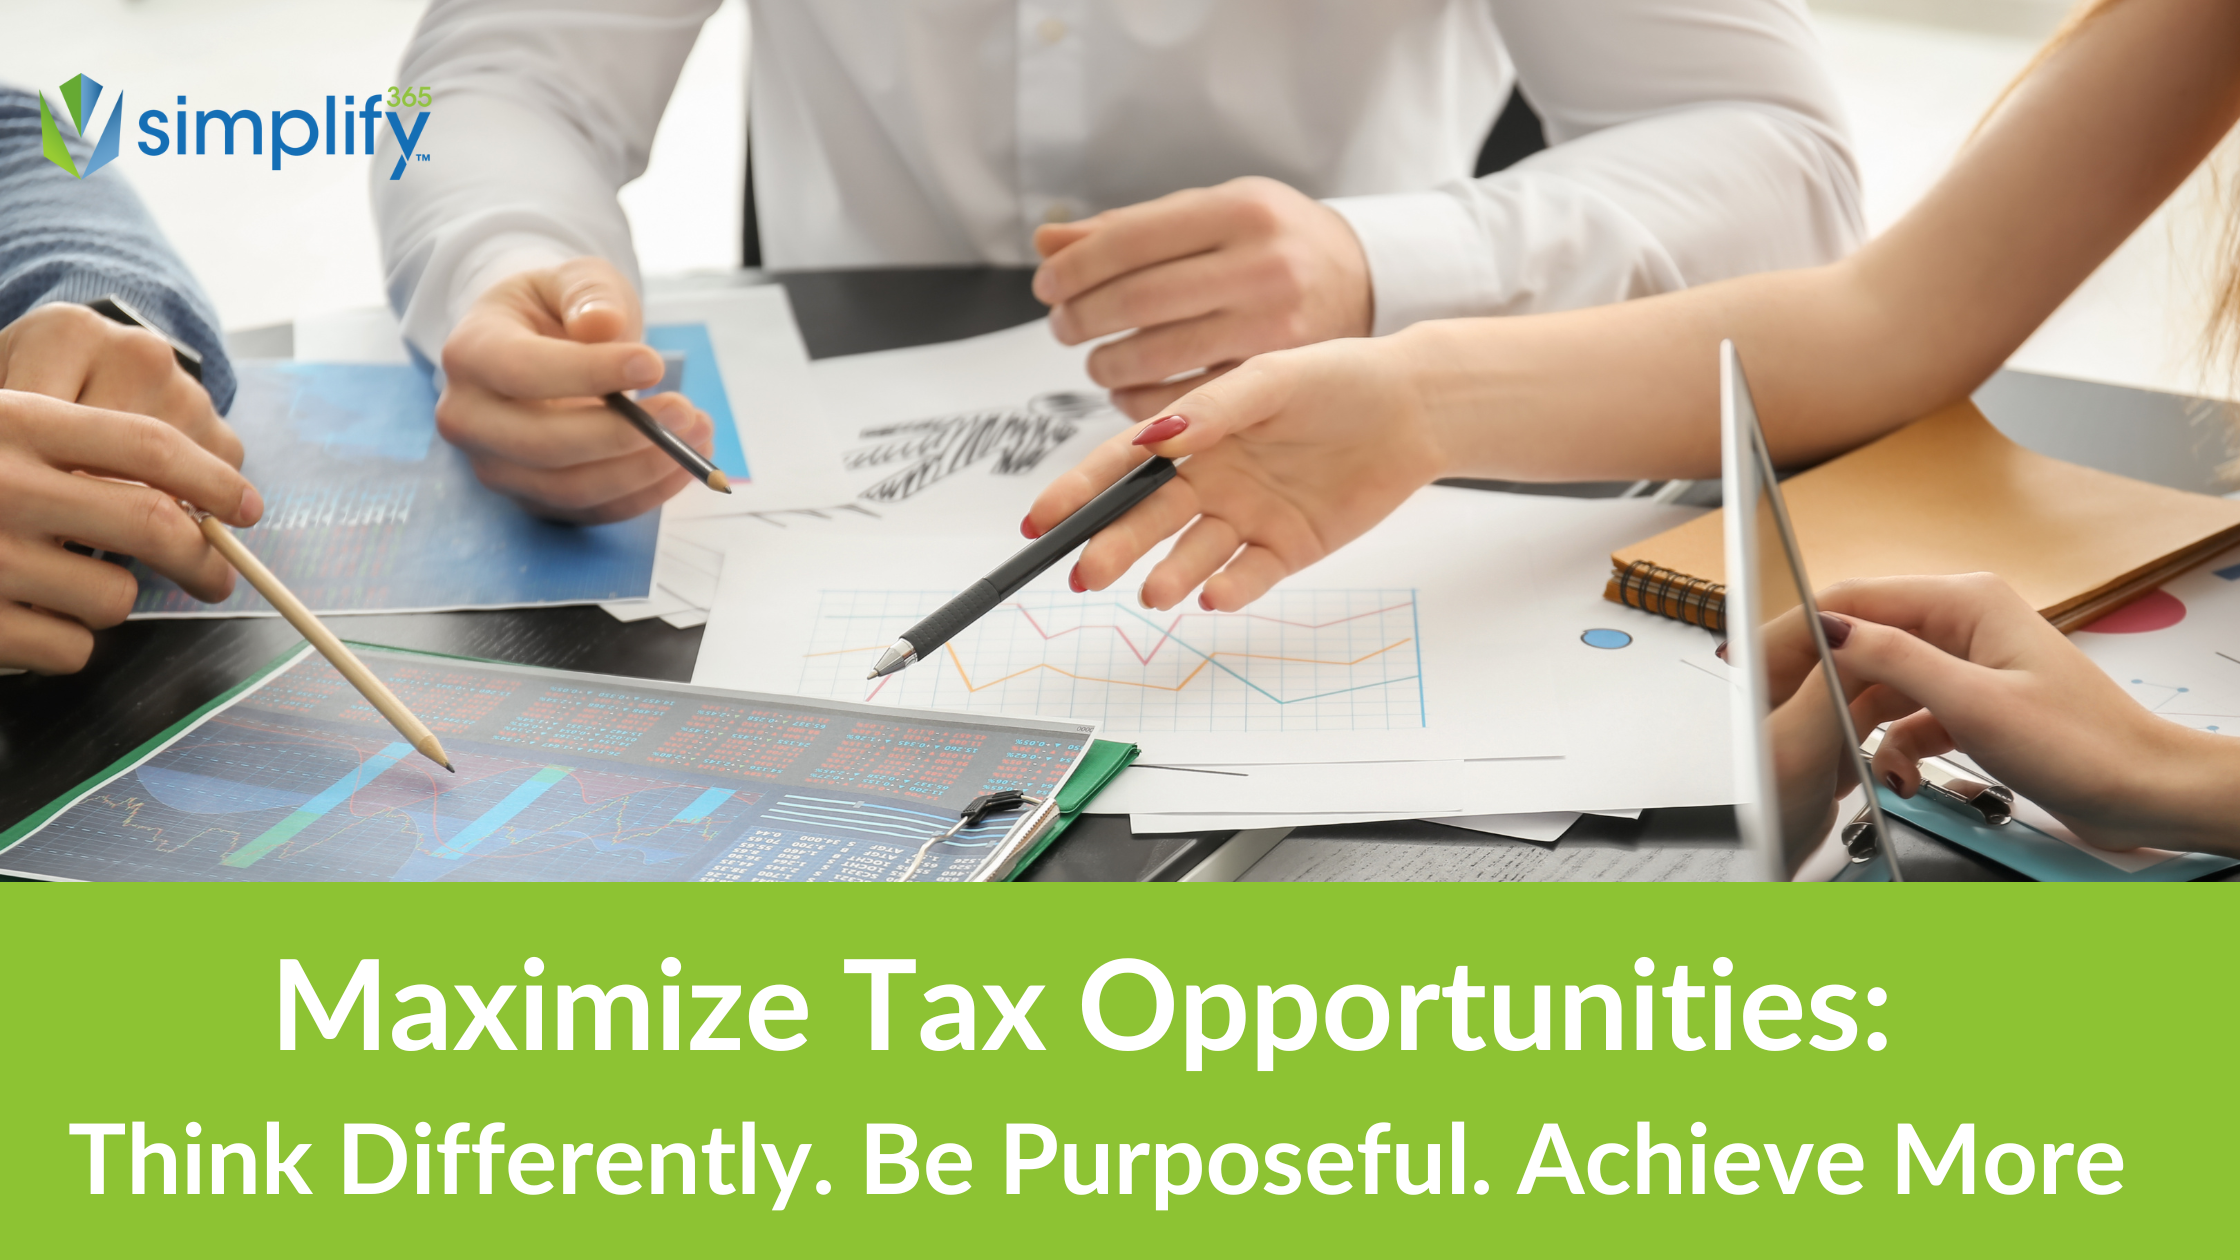 Maximize Tax Opportunities: Think Differently, Be Purposeful, Achieve More